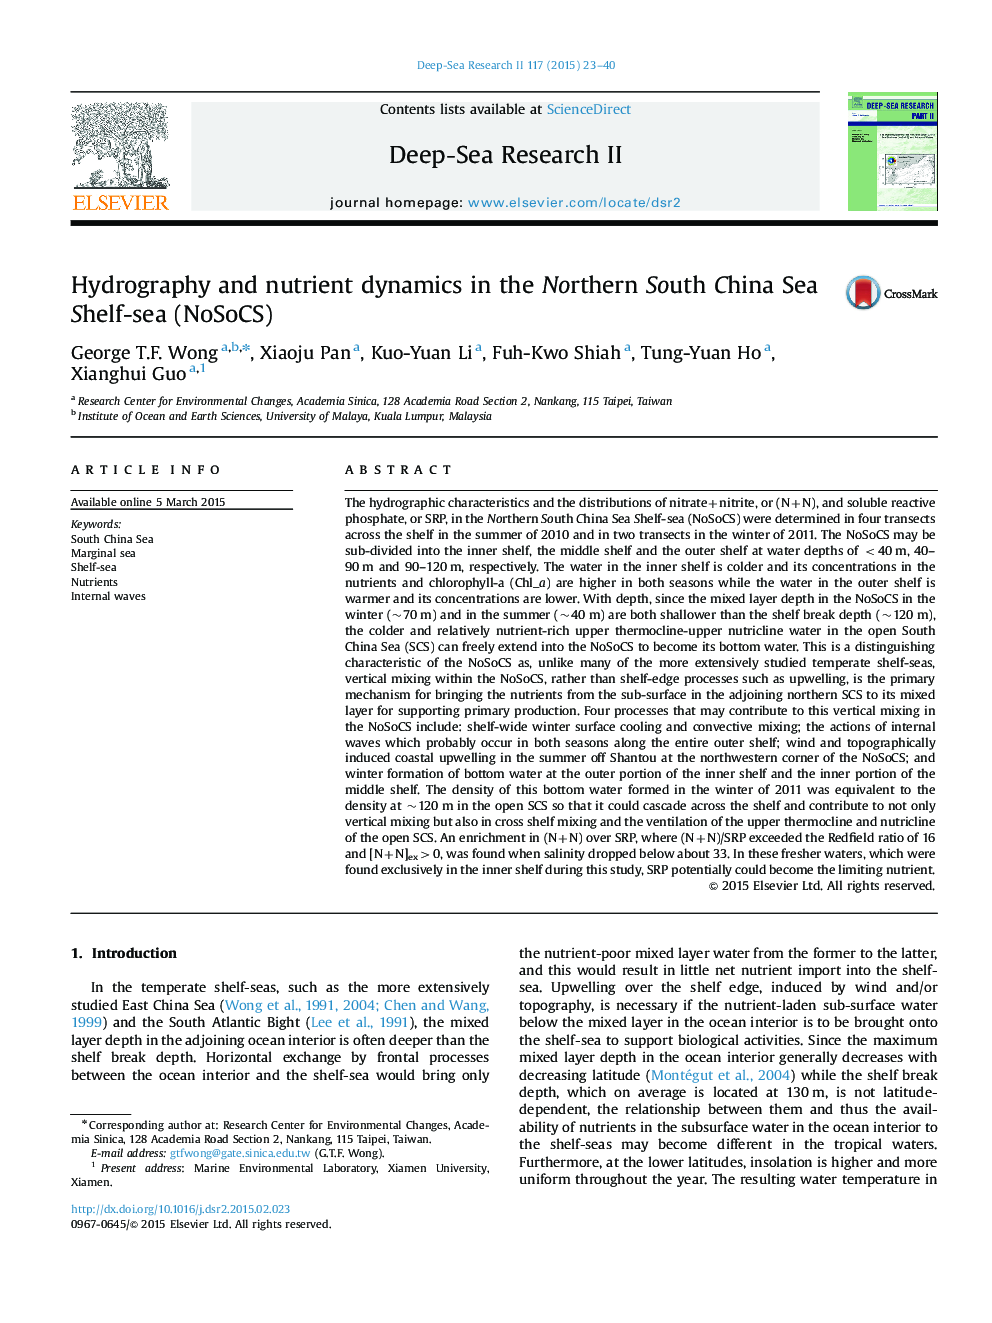 Hydrography and nutrient dynamics in the Northern South China Sea Shelf-sea (NoSoCS)